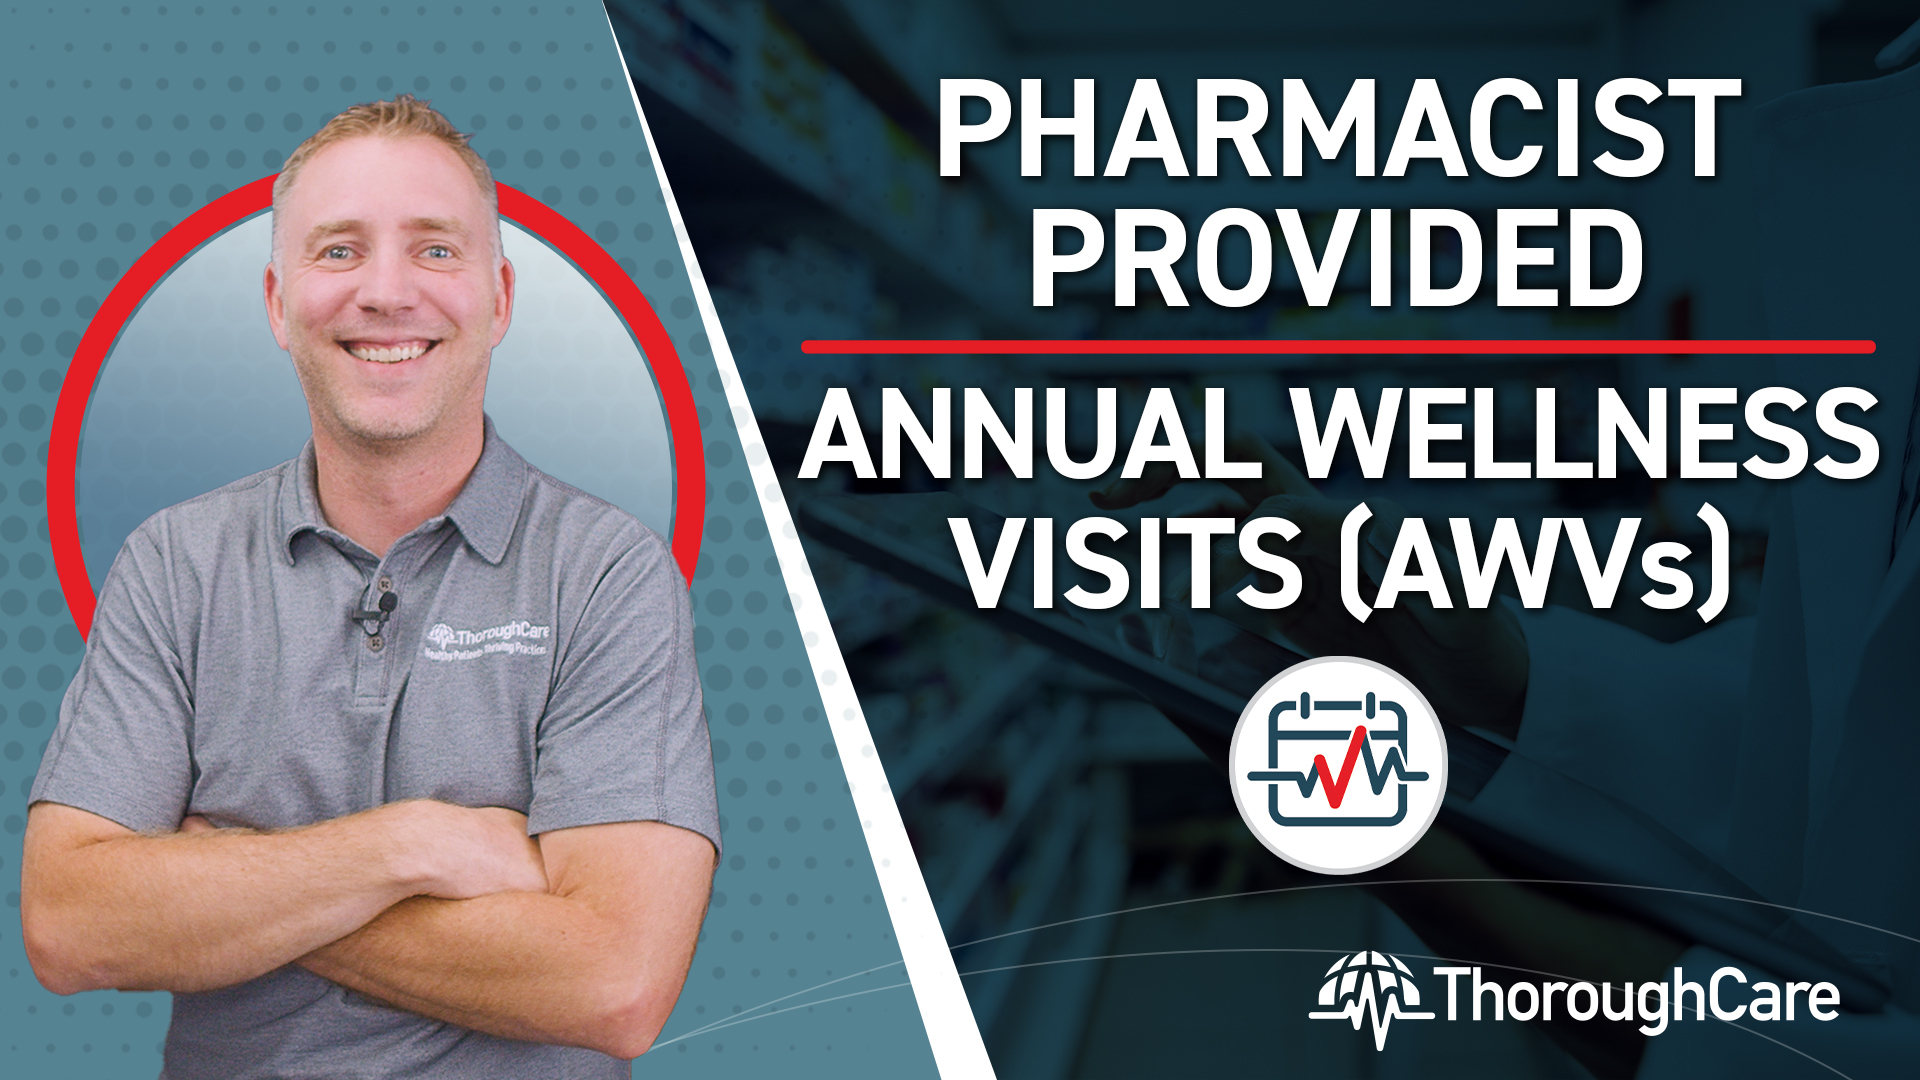 How Pharmacists Benefit From Providing Annual Wellness Visits (AWVs)